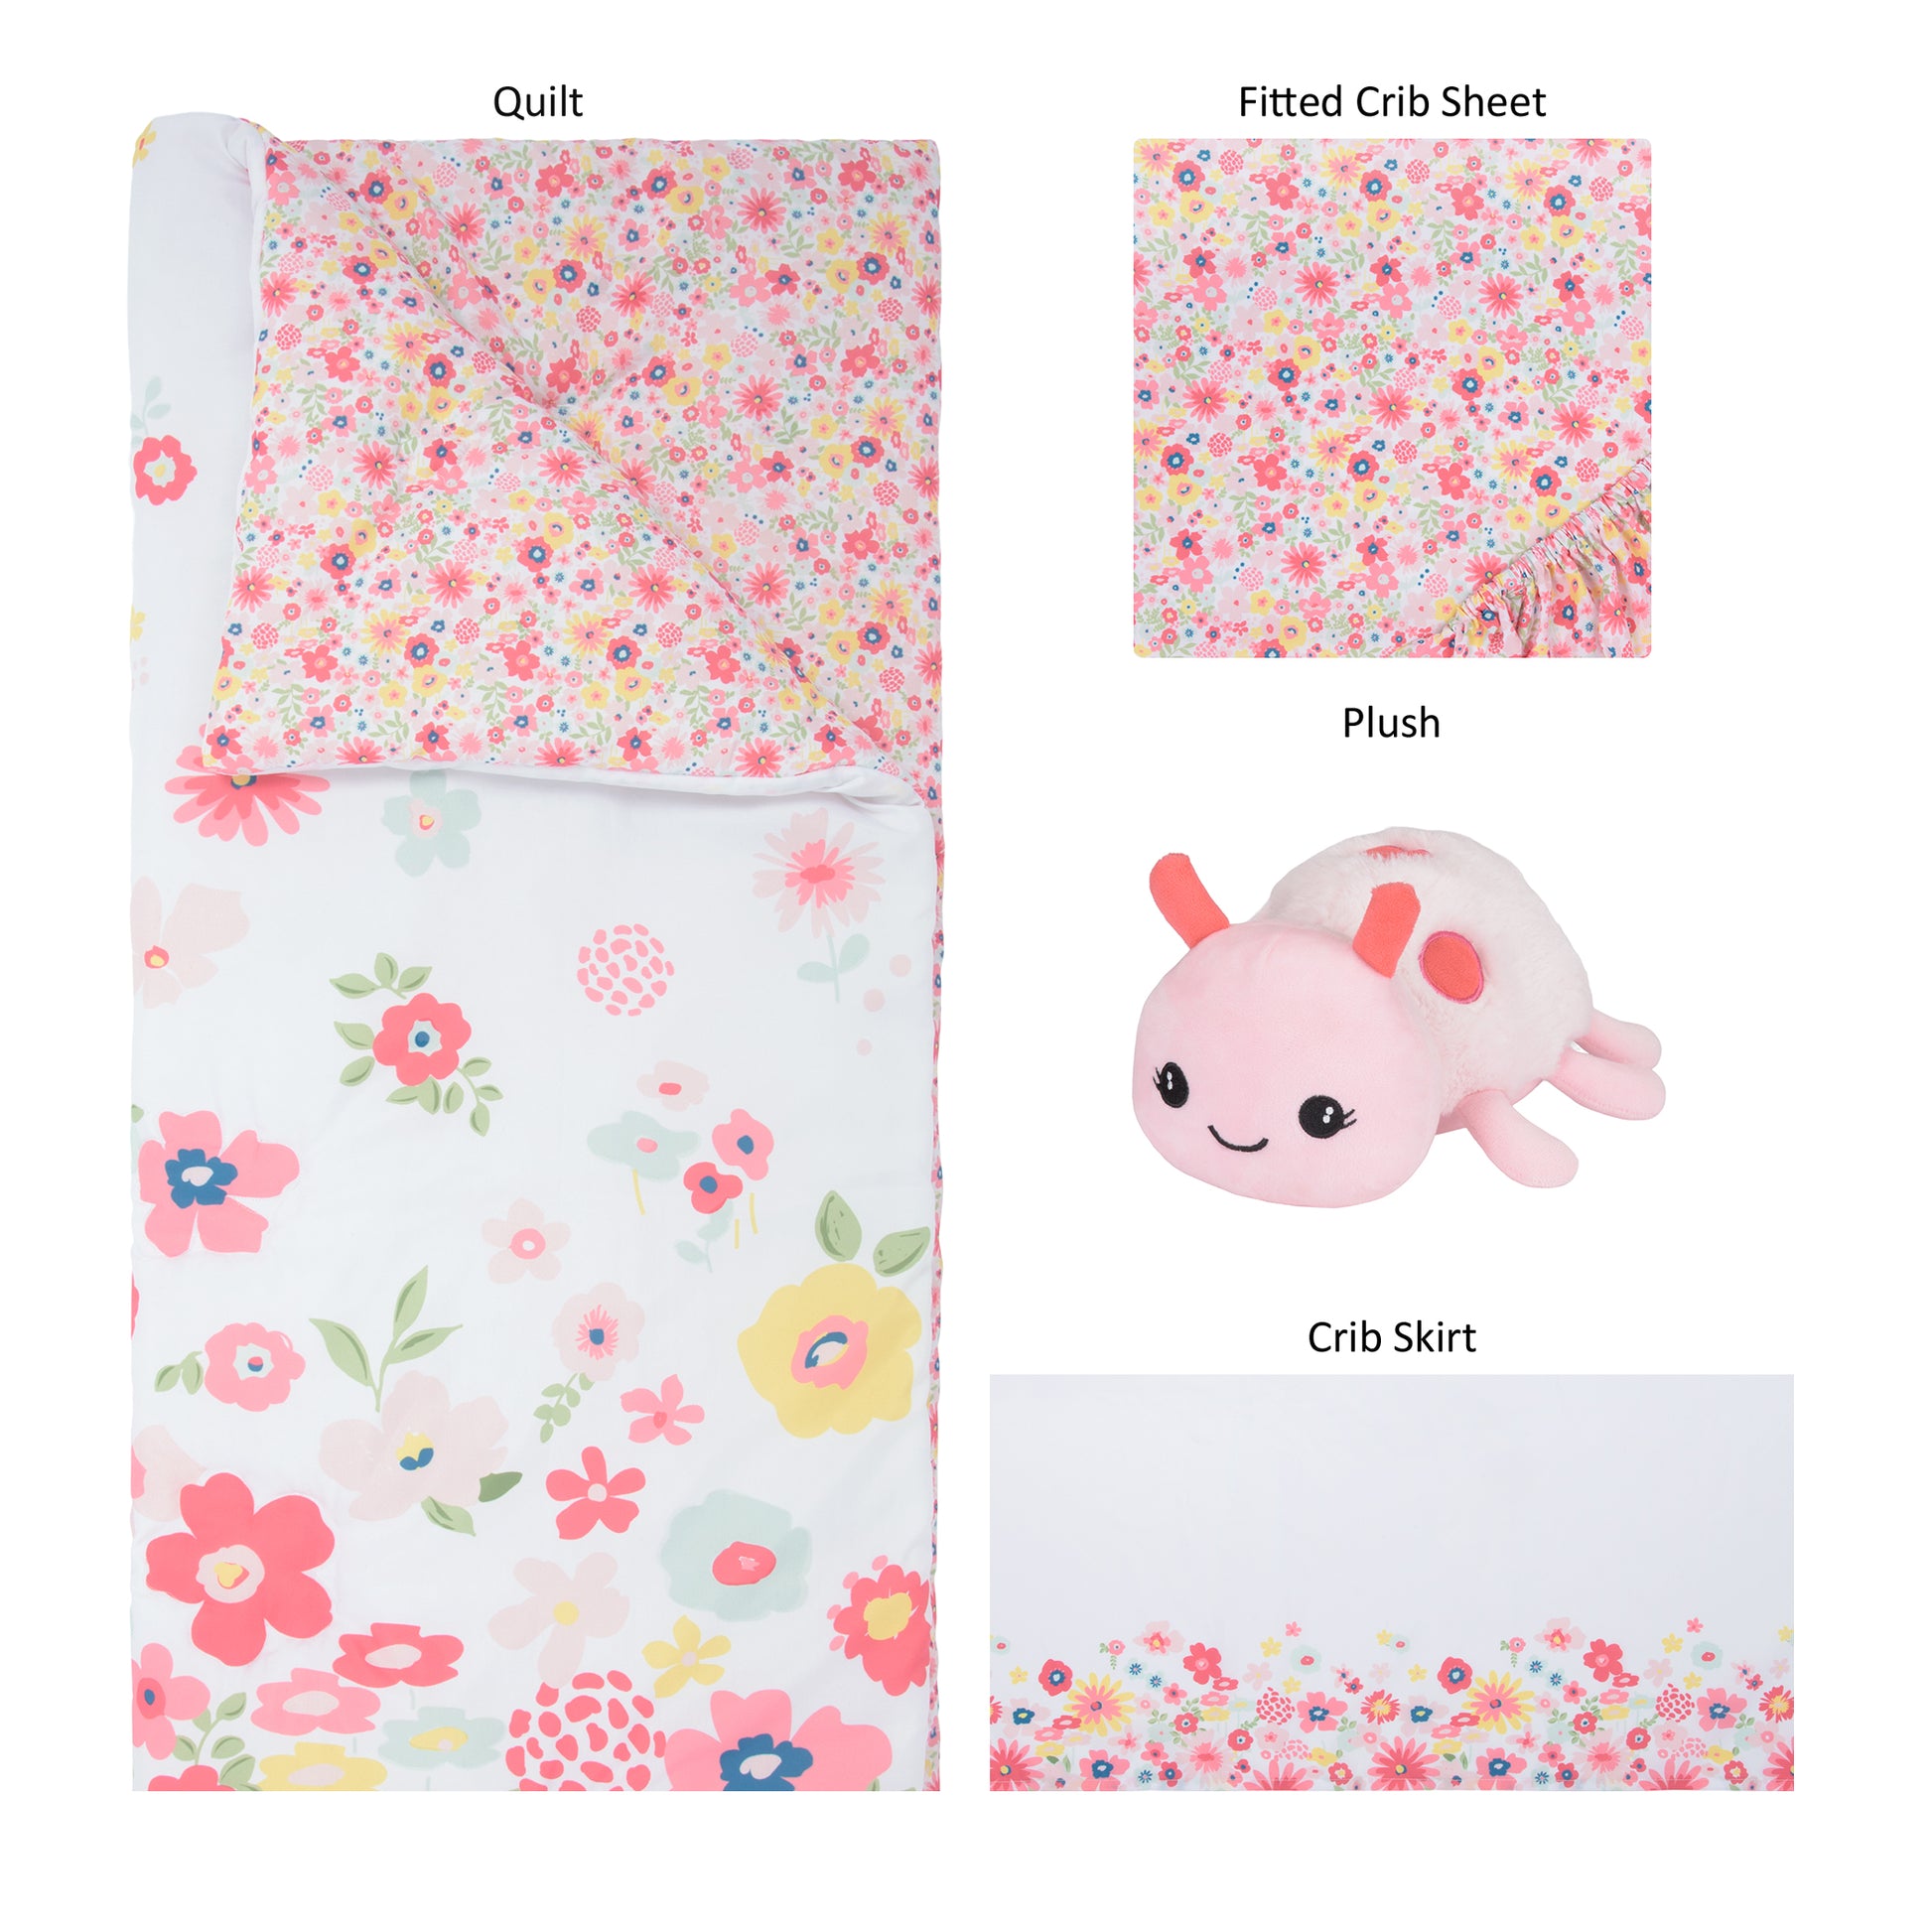 Floral Sprinkles 4 Piece Crib Bedding Set by Sammy & Lou® ; pieces laid out includes nursery quilt, crib sheet, crib skirt and ladybug plush toys